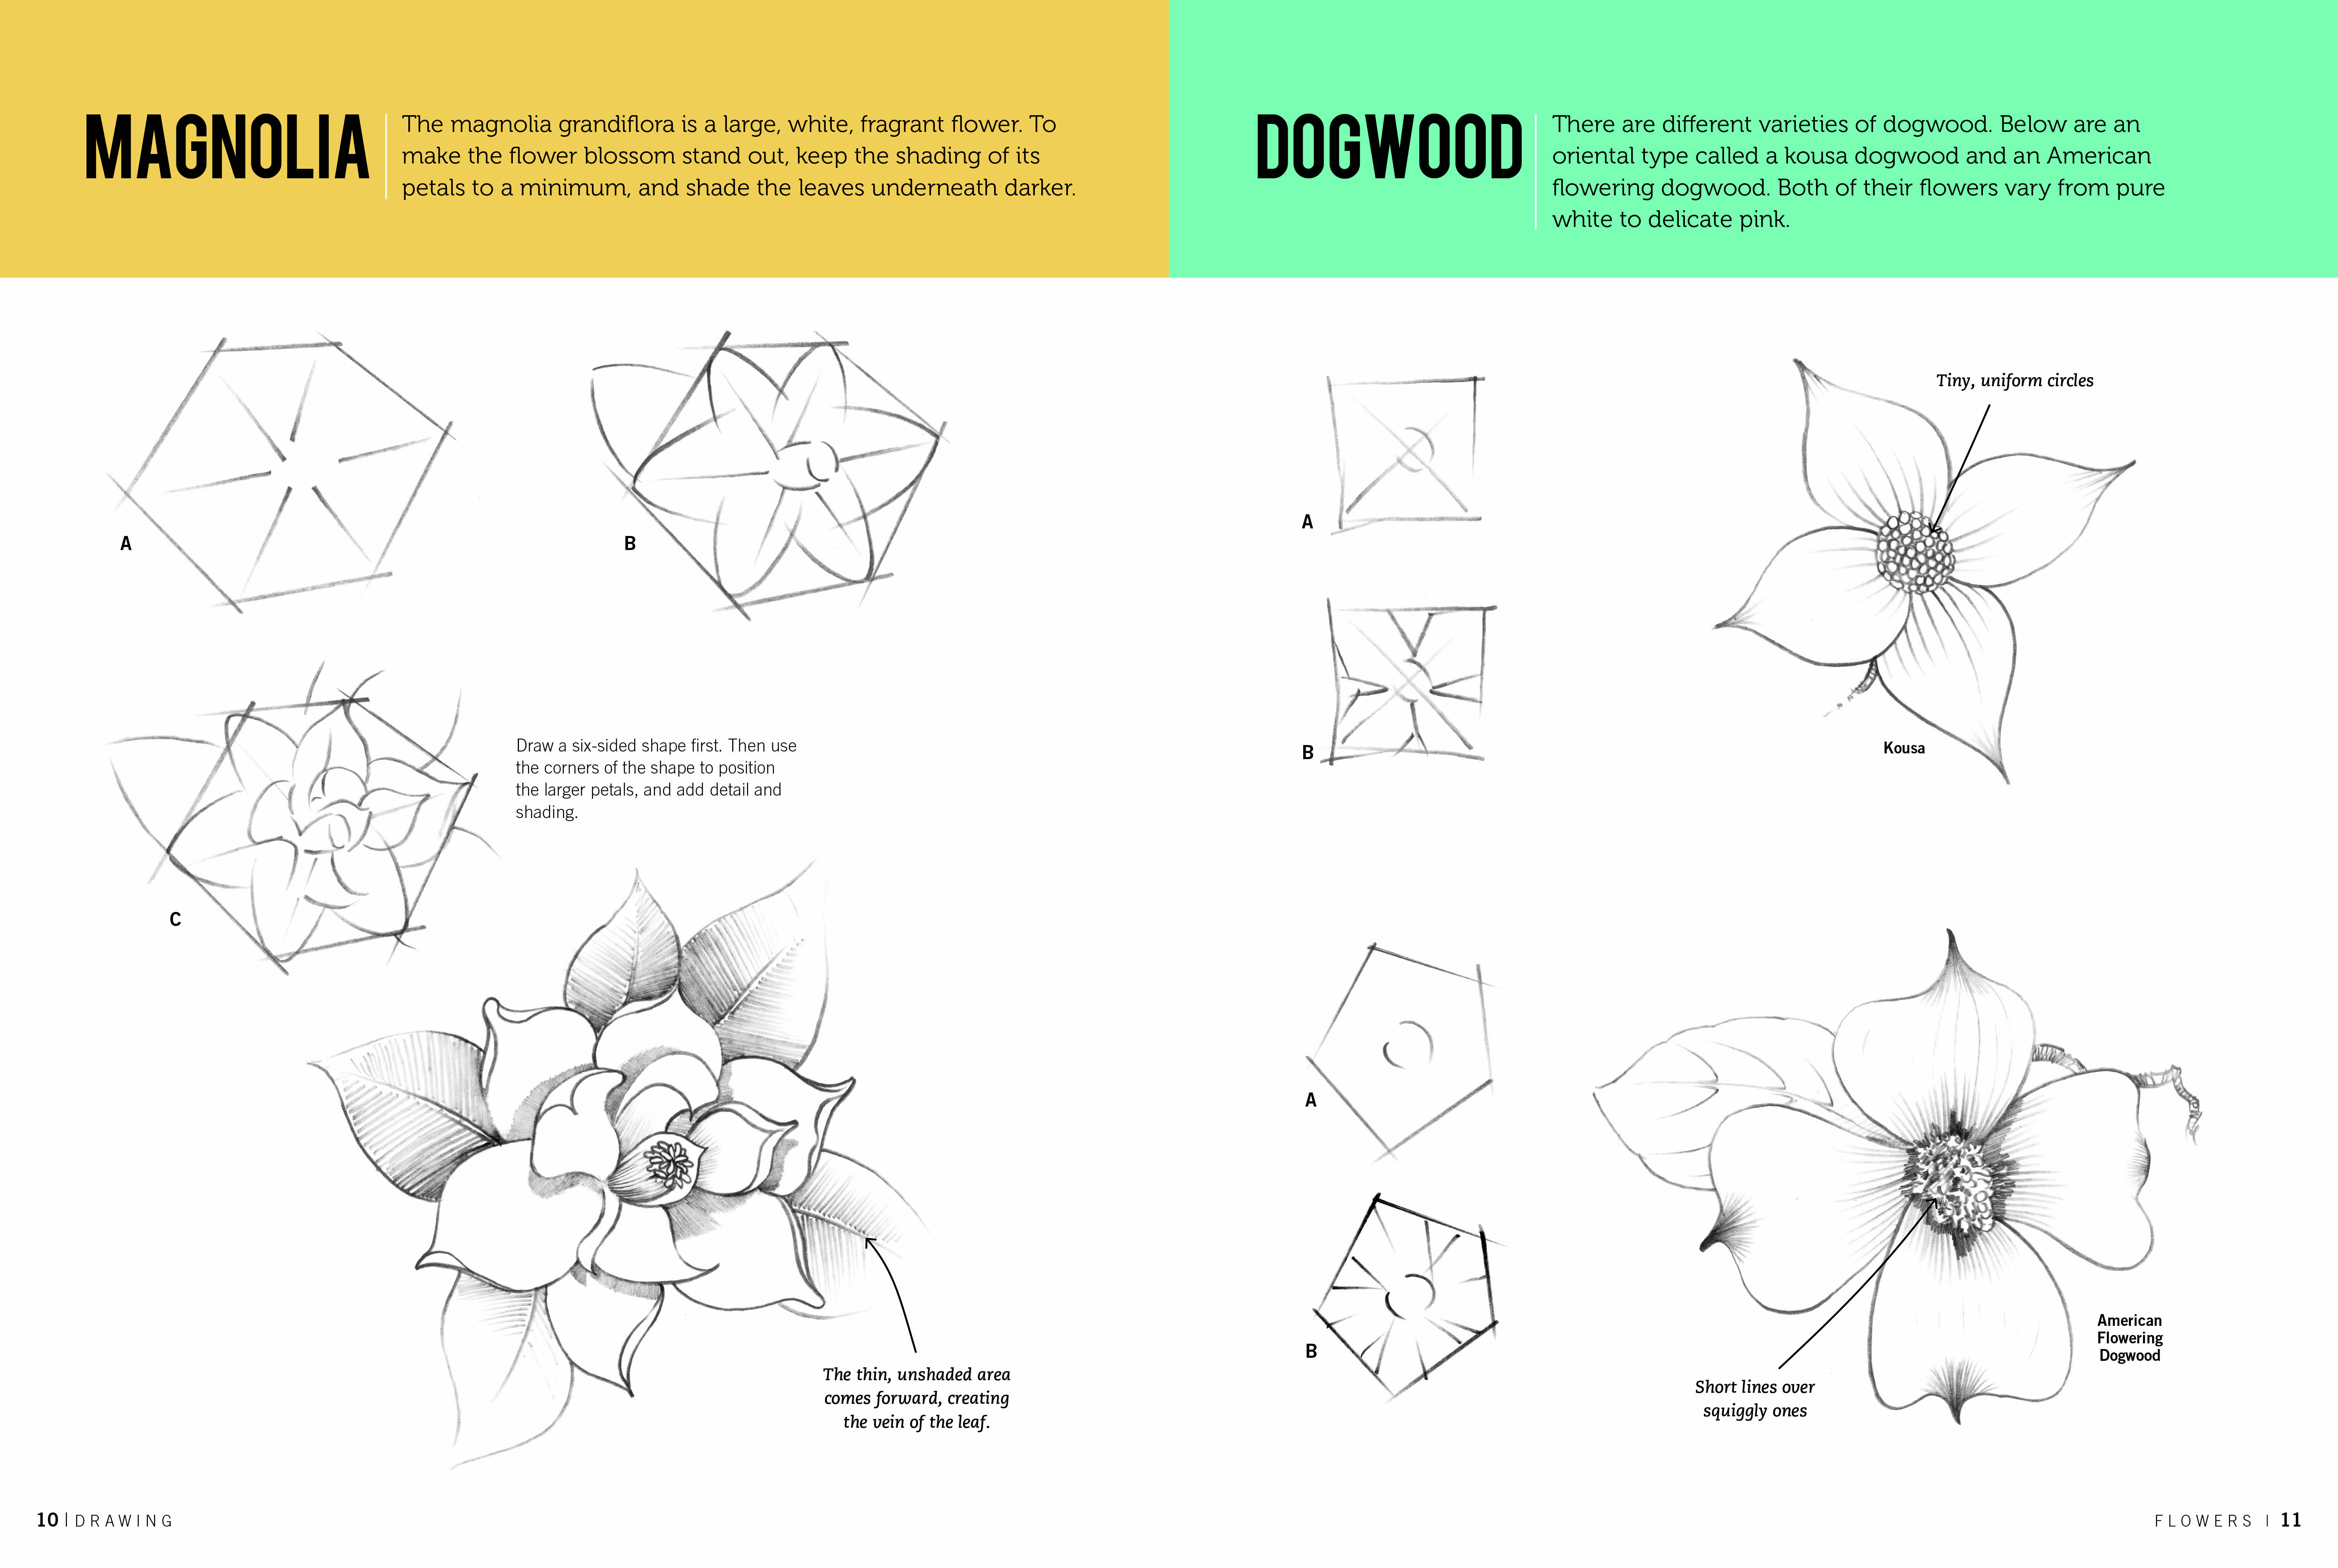 Drawing: Flowers with William F. Powell